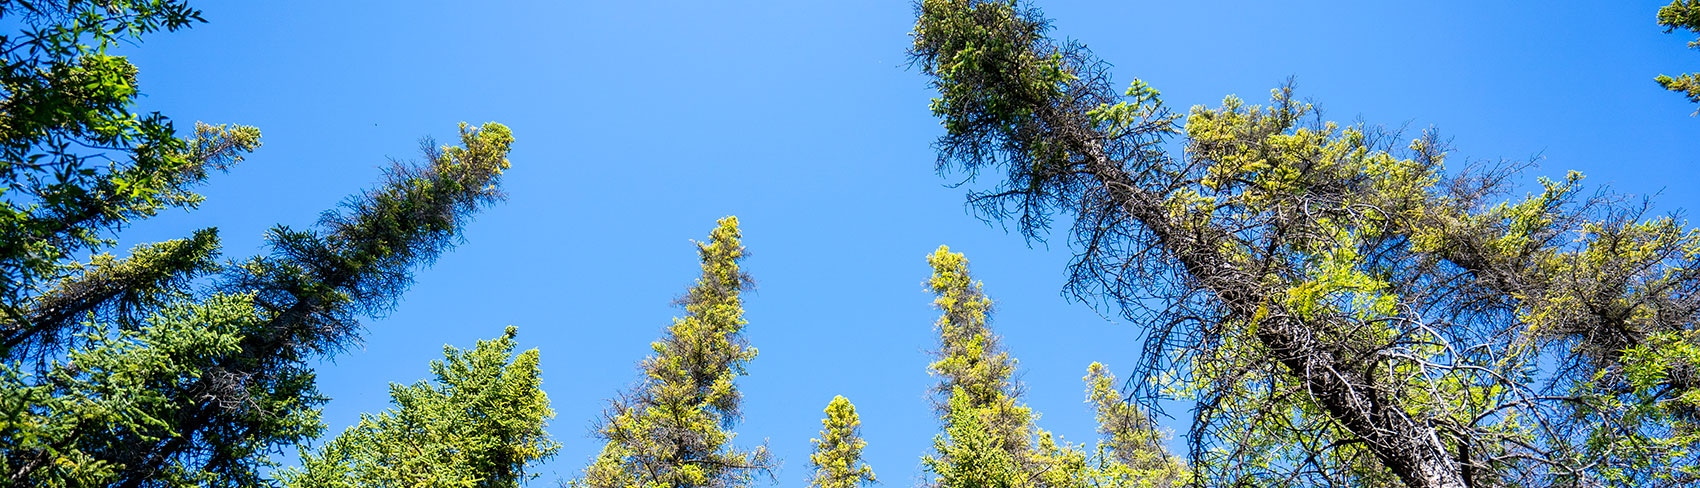 A view of trees against brilliant blue skies, taken from the ground.